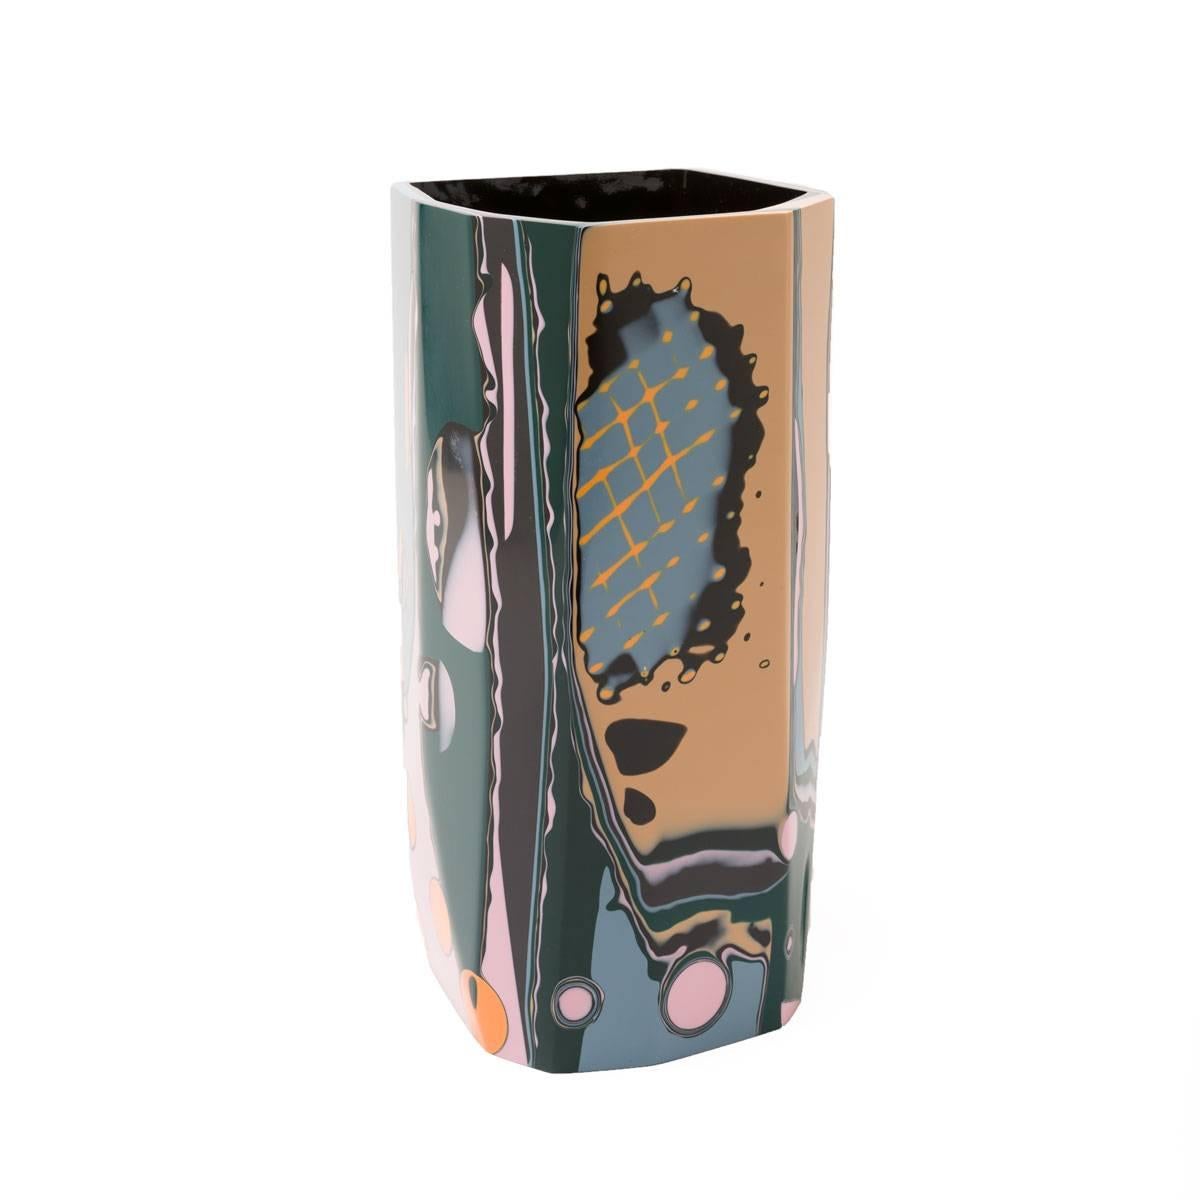 The stunning and unique Tasmania vase is part of our Black Magic collection, inspired by the concept of revealing that which has been hidden from sight, but remains ever-present.

Gazing toward the past, to cultures and civilizations at the edge